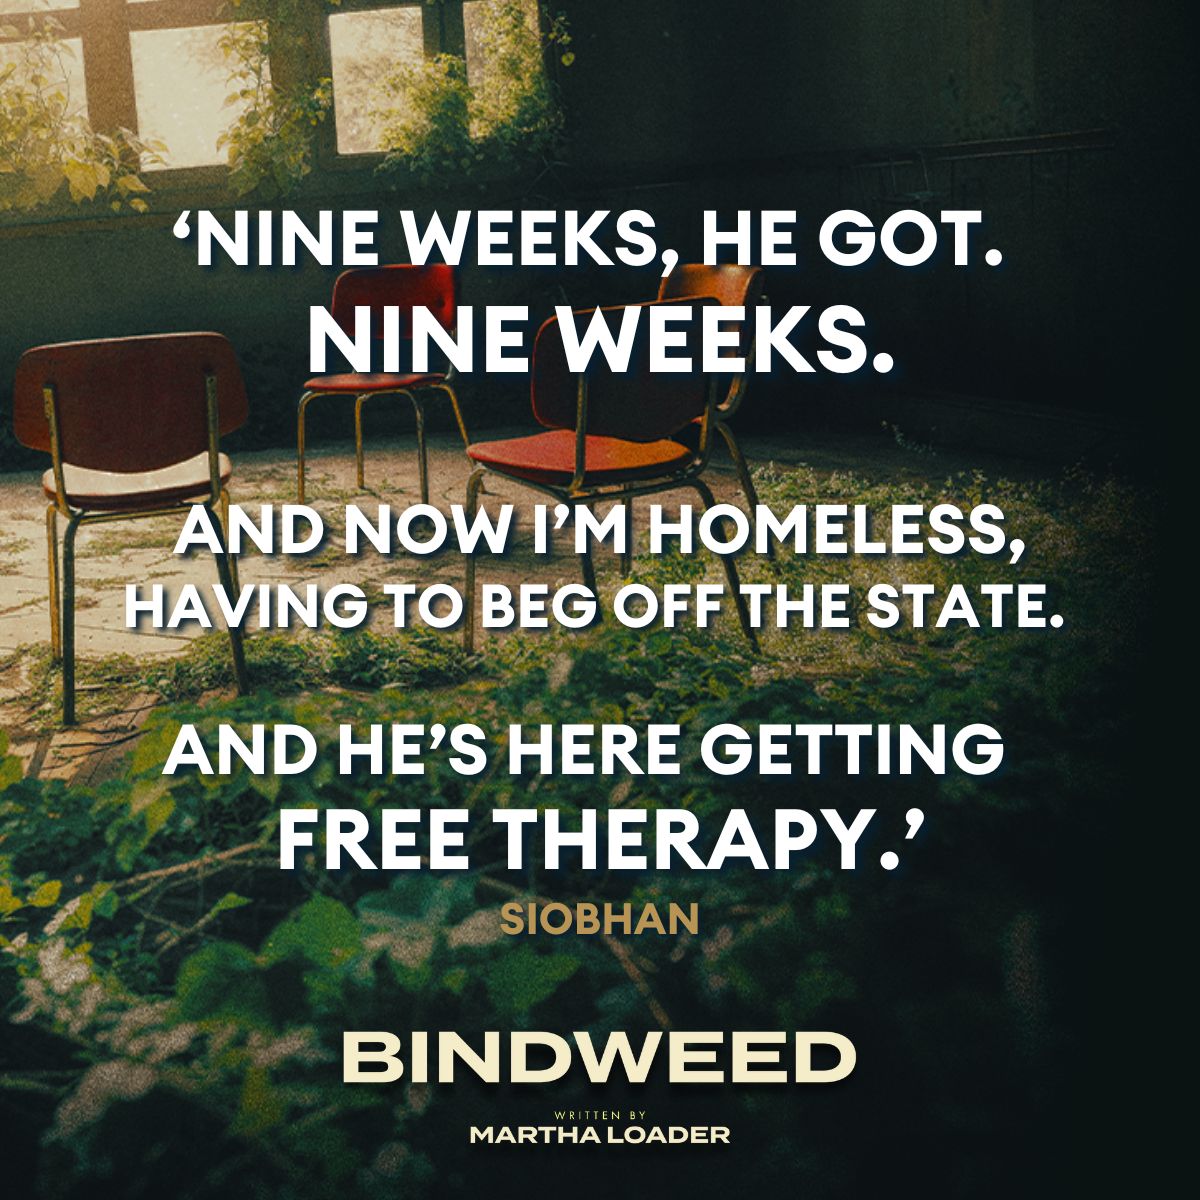 Bindweed is an award-winning black comedy written by former Mercury Creative, @MarthaLoader. Come along and join us for our next Mercury Original from Thu 13 - Sat 22 Jun and support new writing from local creatives. Don't delay, book tickets today: buff.ly/3KhexUy